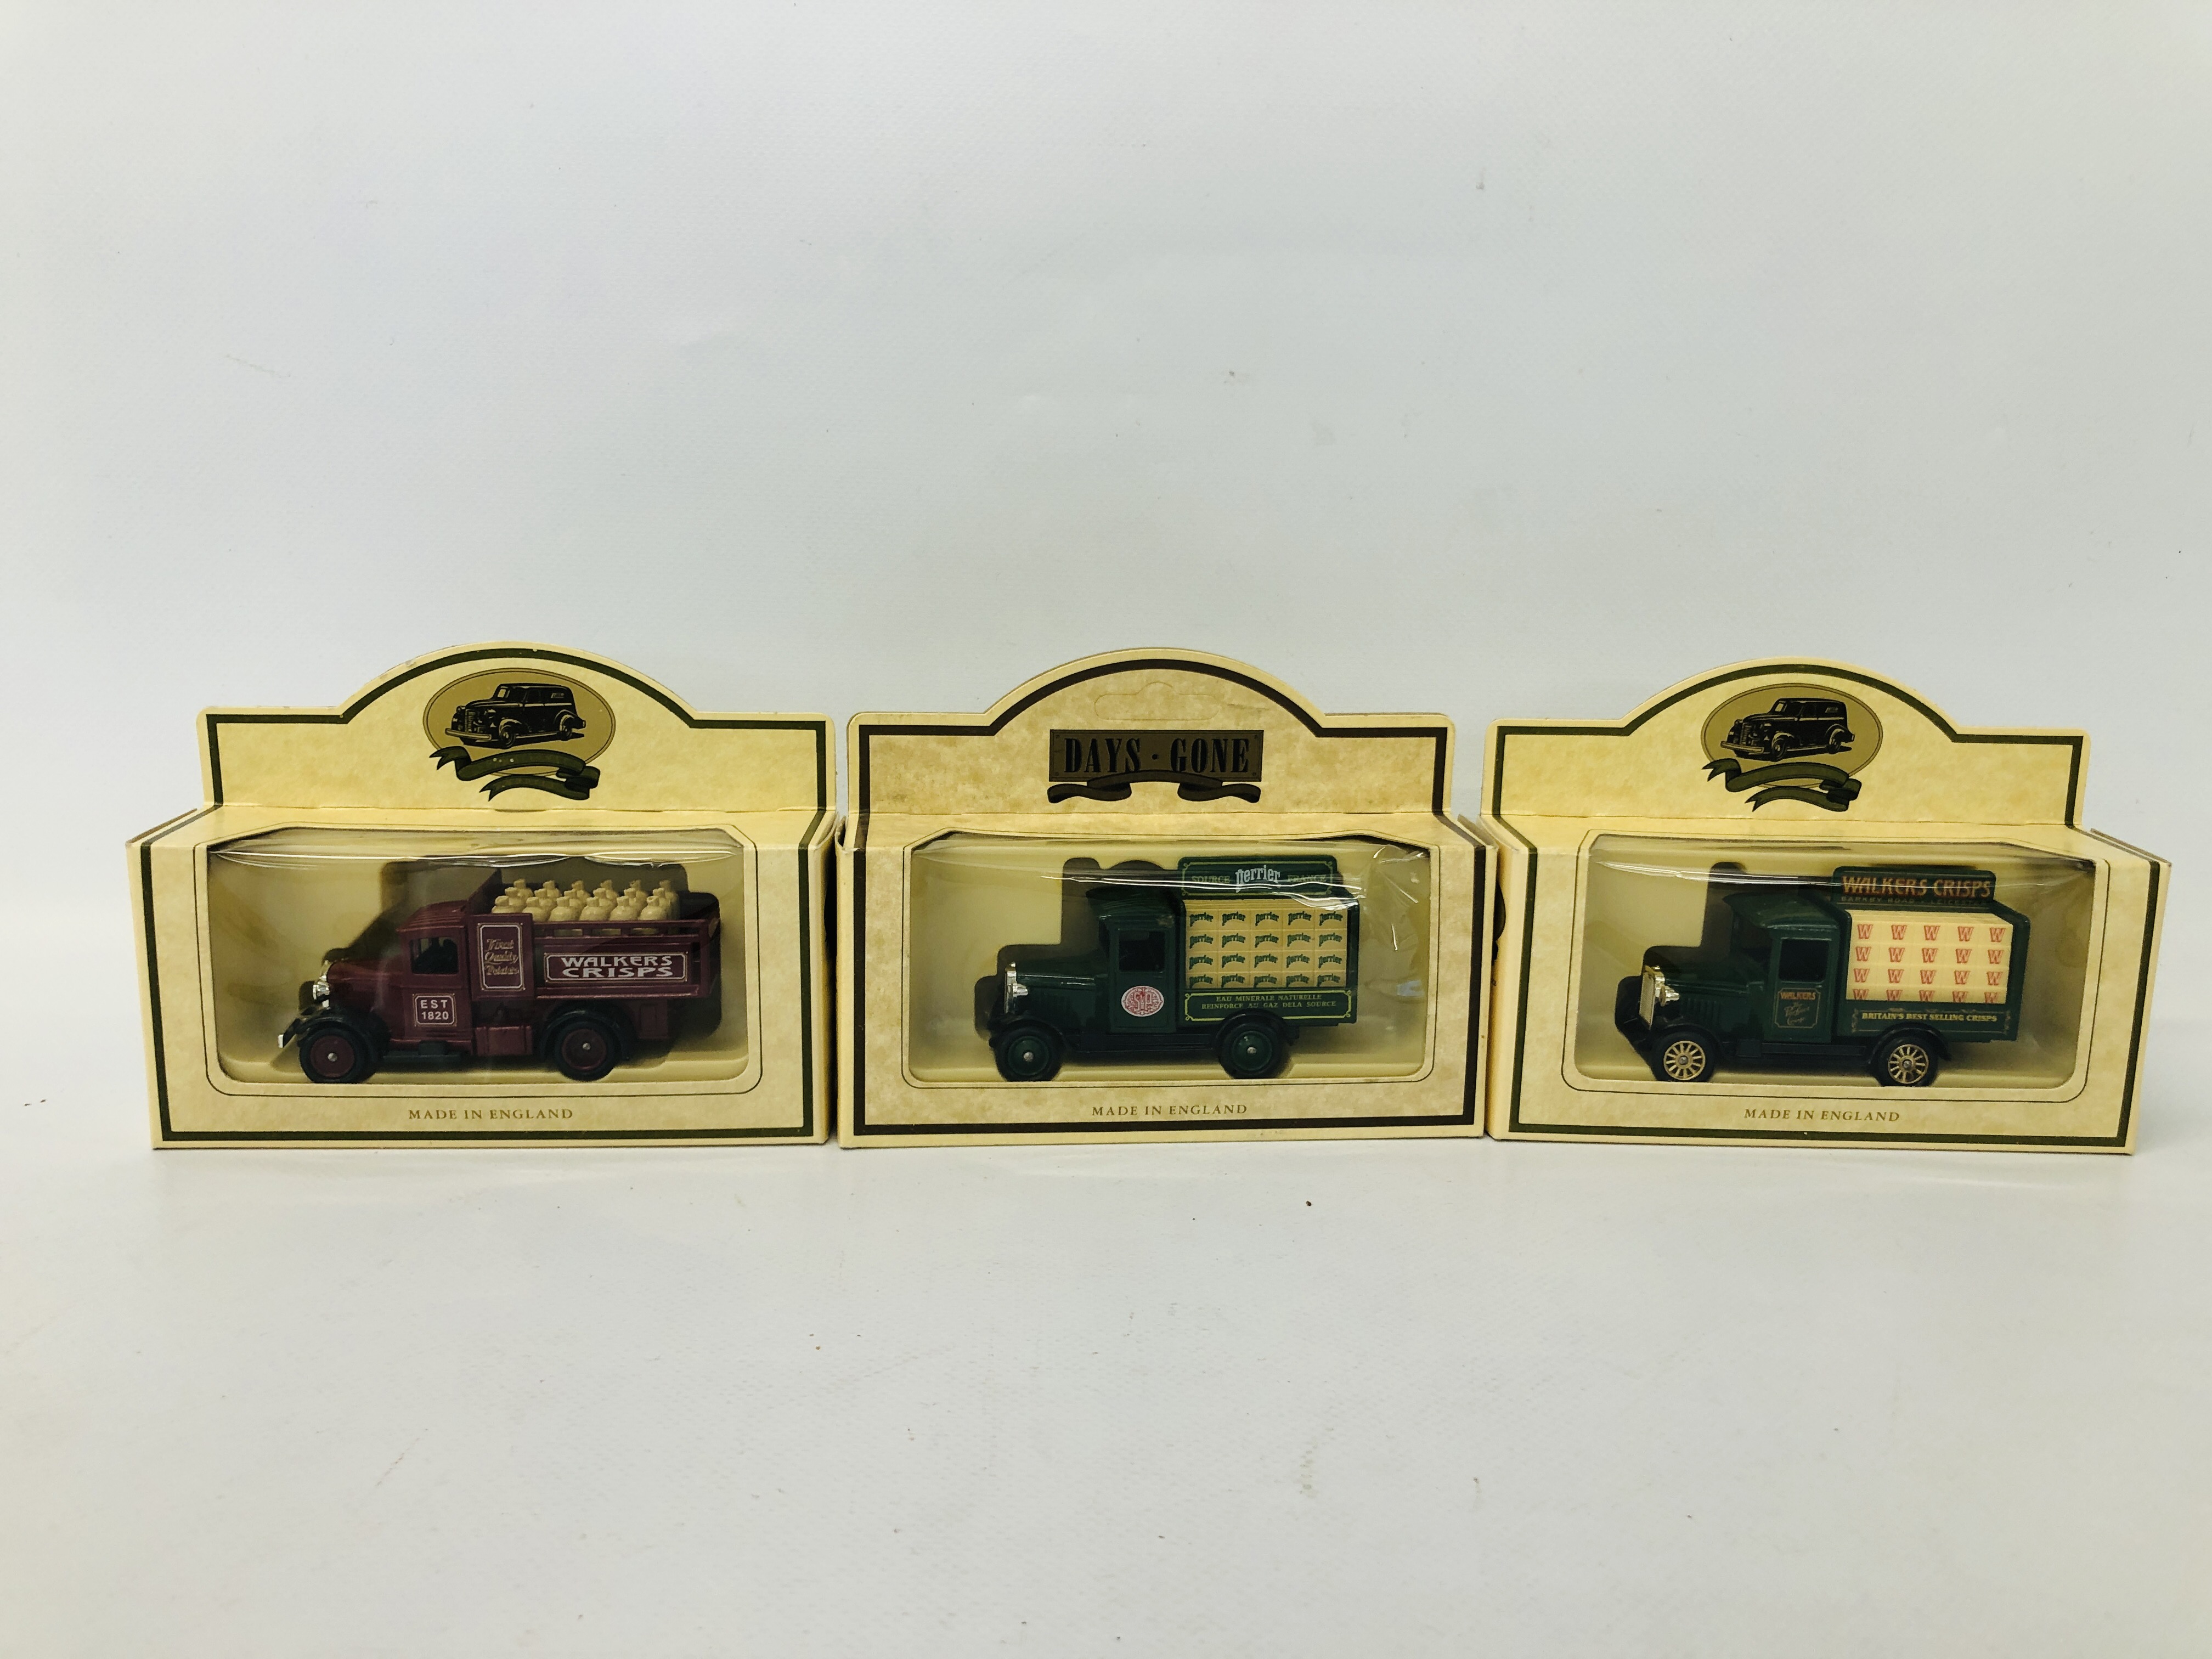 COLLECTION OF DAYS GONE COLLECTORS DIE-CAST MODEL VEHICLES IN ORIGINAL BOXES - Image 7 of 10